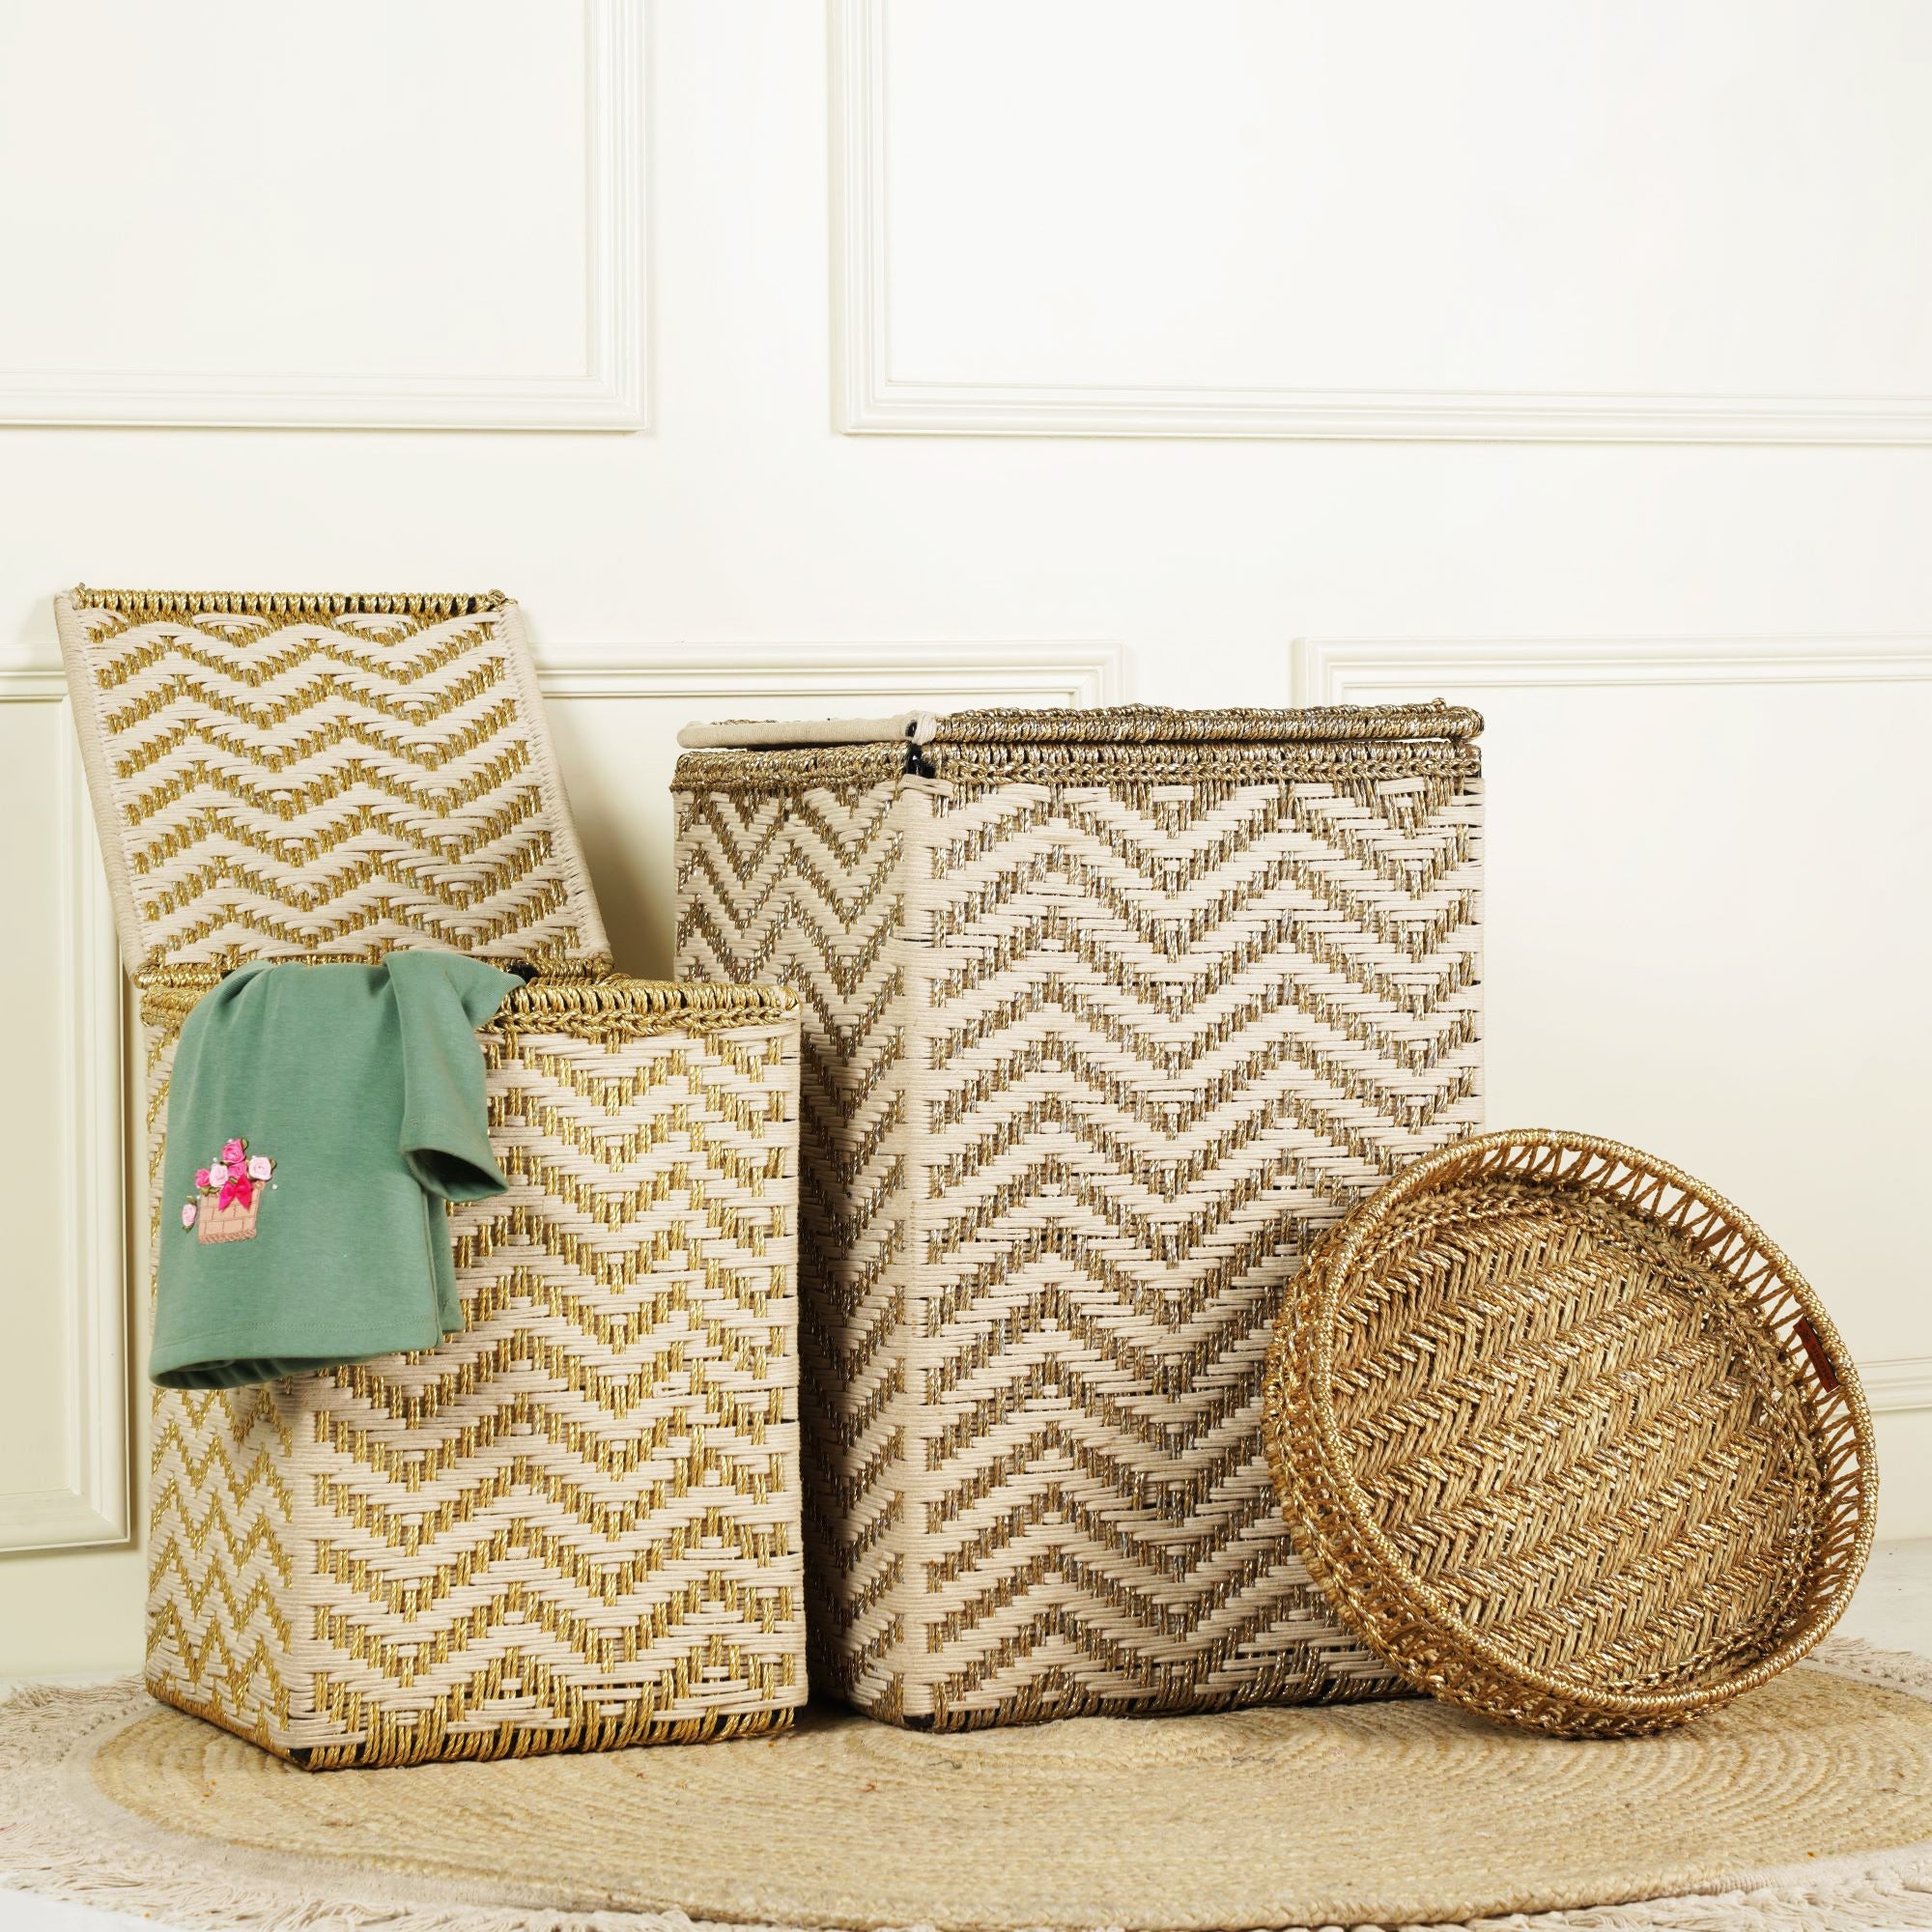 The Gold Rush - Combo of Kids and Adult Laundry baskets and Tray (3 products)